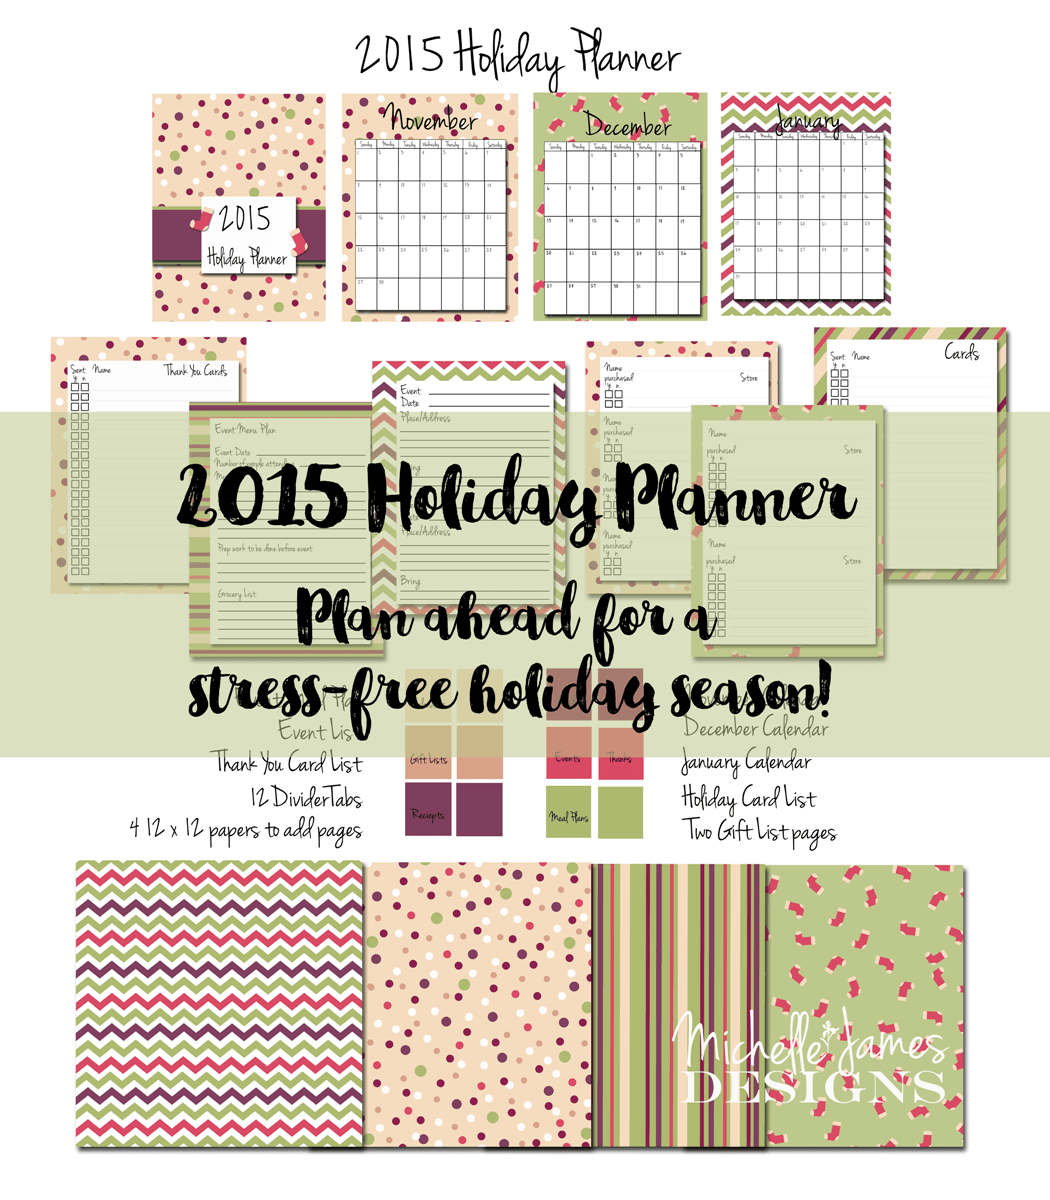 2015 Holiday Planner - www.michellejdesigns.com - Don't stress, plan! Keep this planner with you at all times for a stress free holiday season.